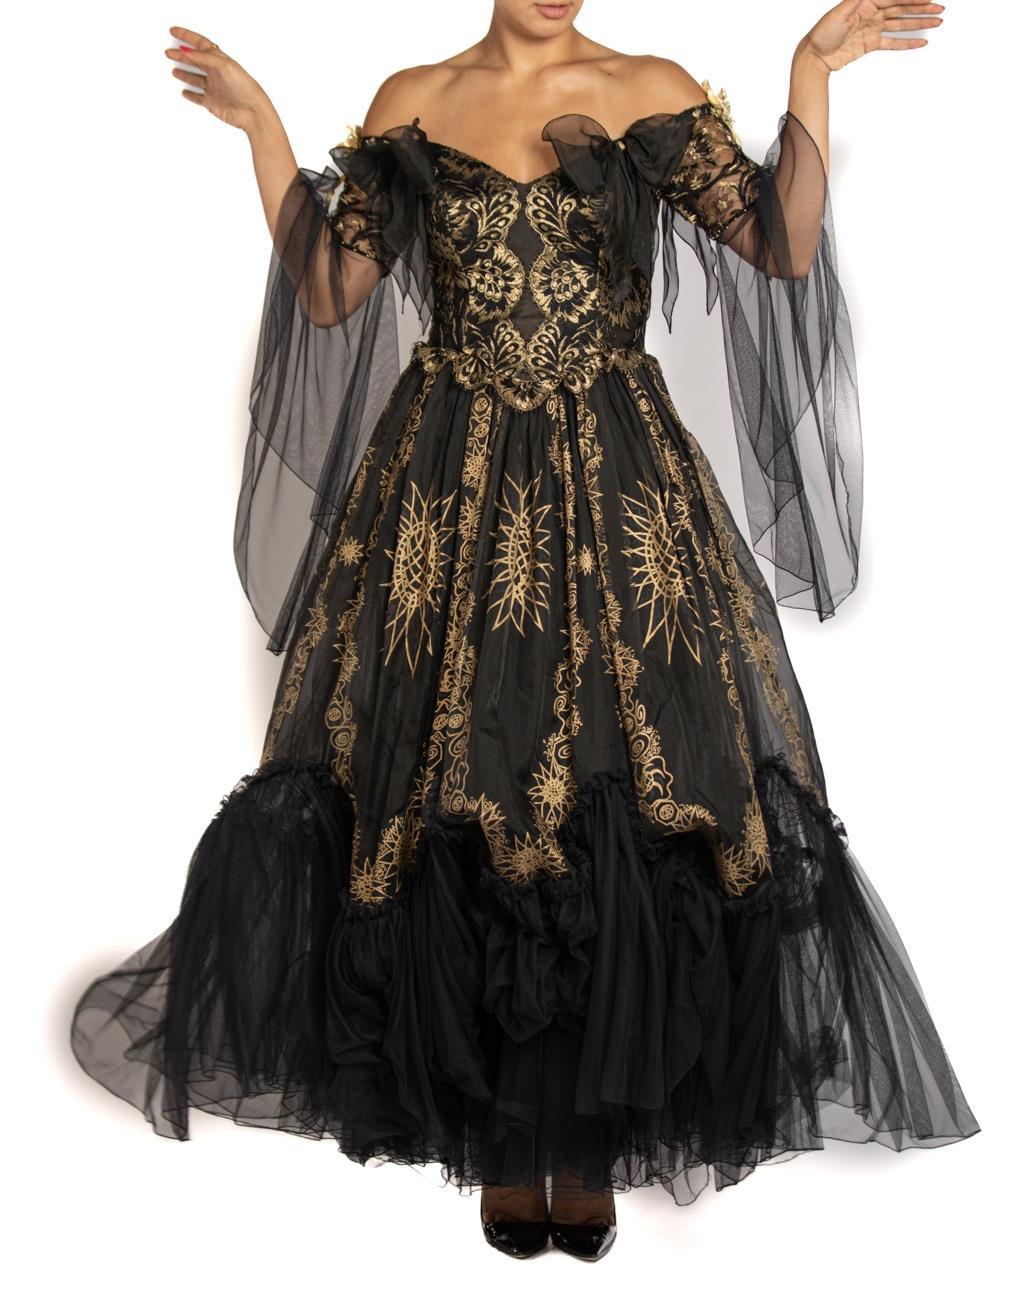 1980S ZANDRA RHODES Black & Gold Lace Ball Gown For Sale 4